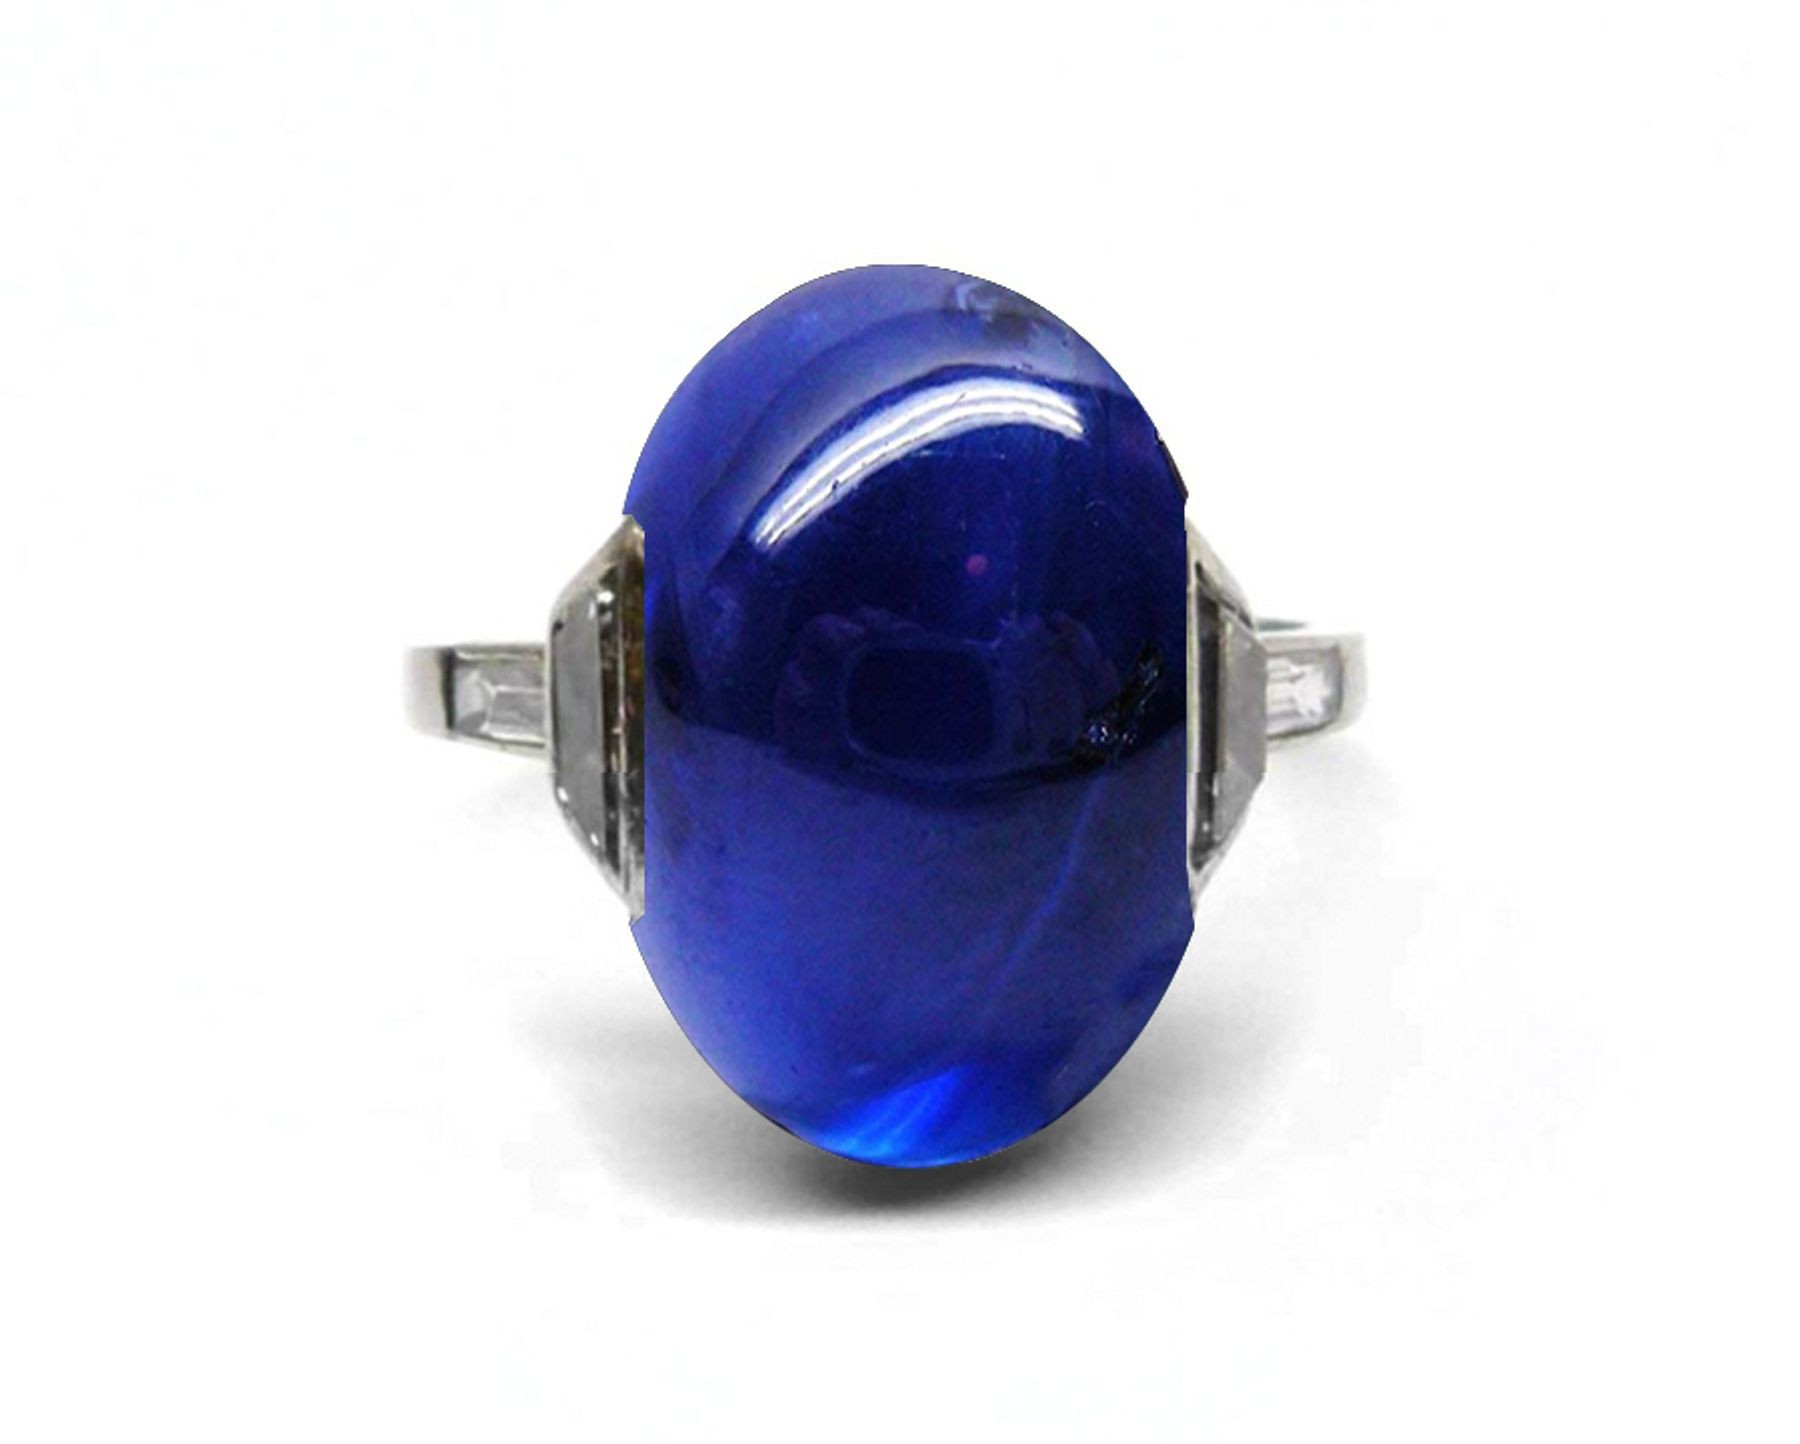 Edwardian, Belle Epoque, Ocean Blue, Luscious Blue, Deeply Saturated Sapphire Cabochon 6.0 carats